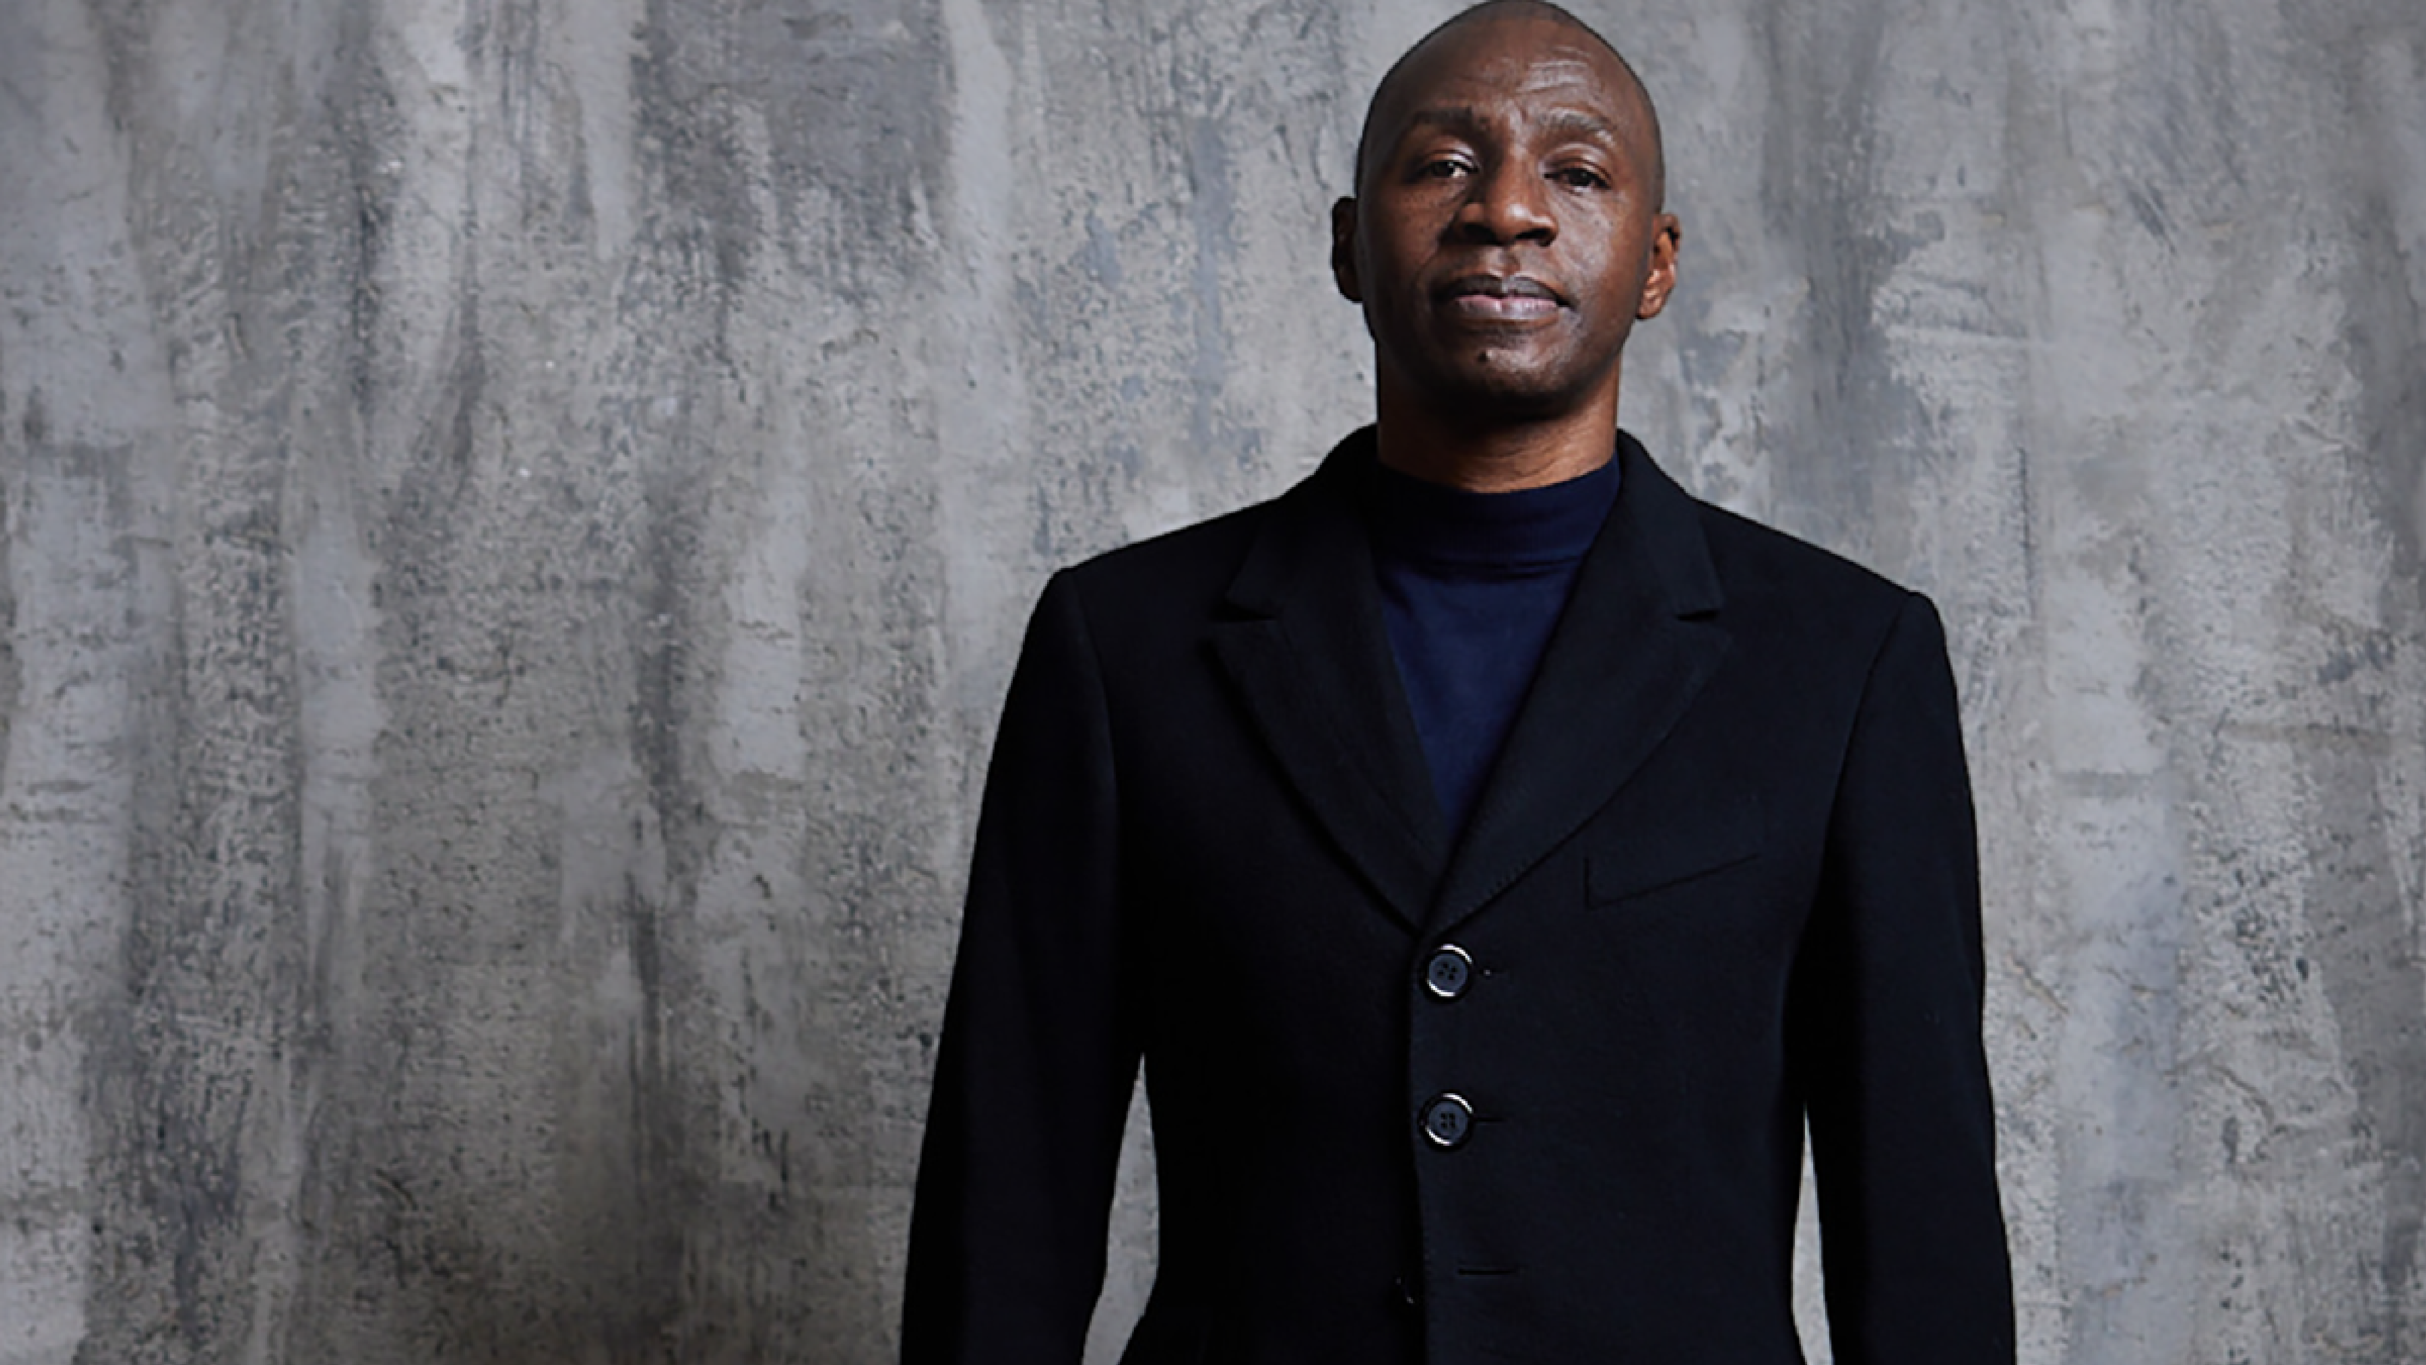 Tunde - The Voice of Lighthouse Family in London promo photo for Ticketmaster presale offer code